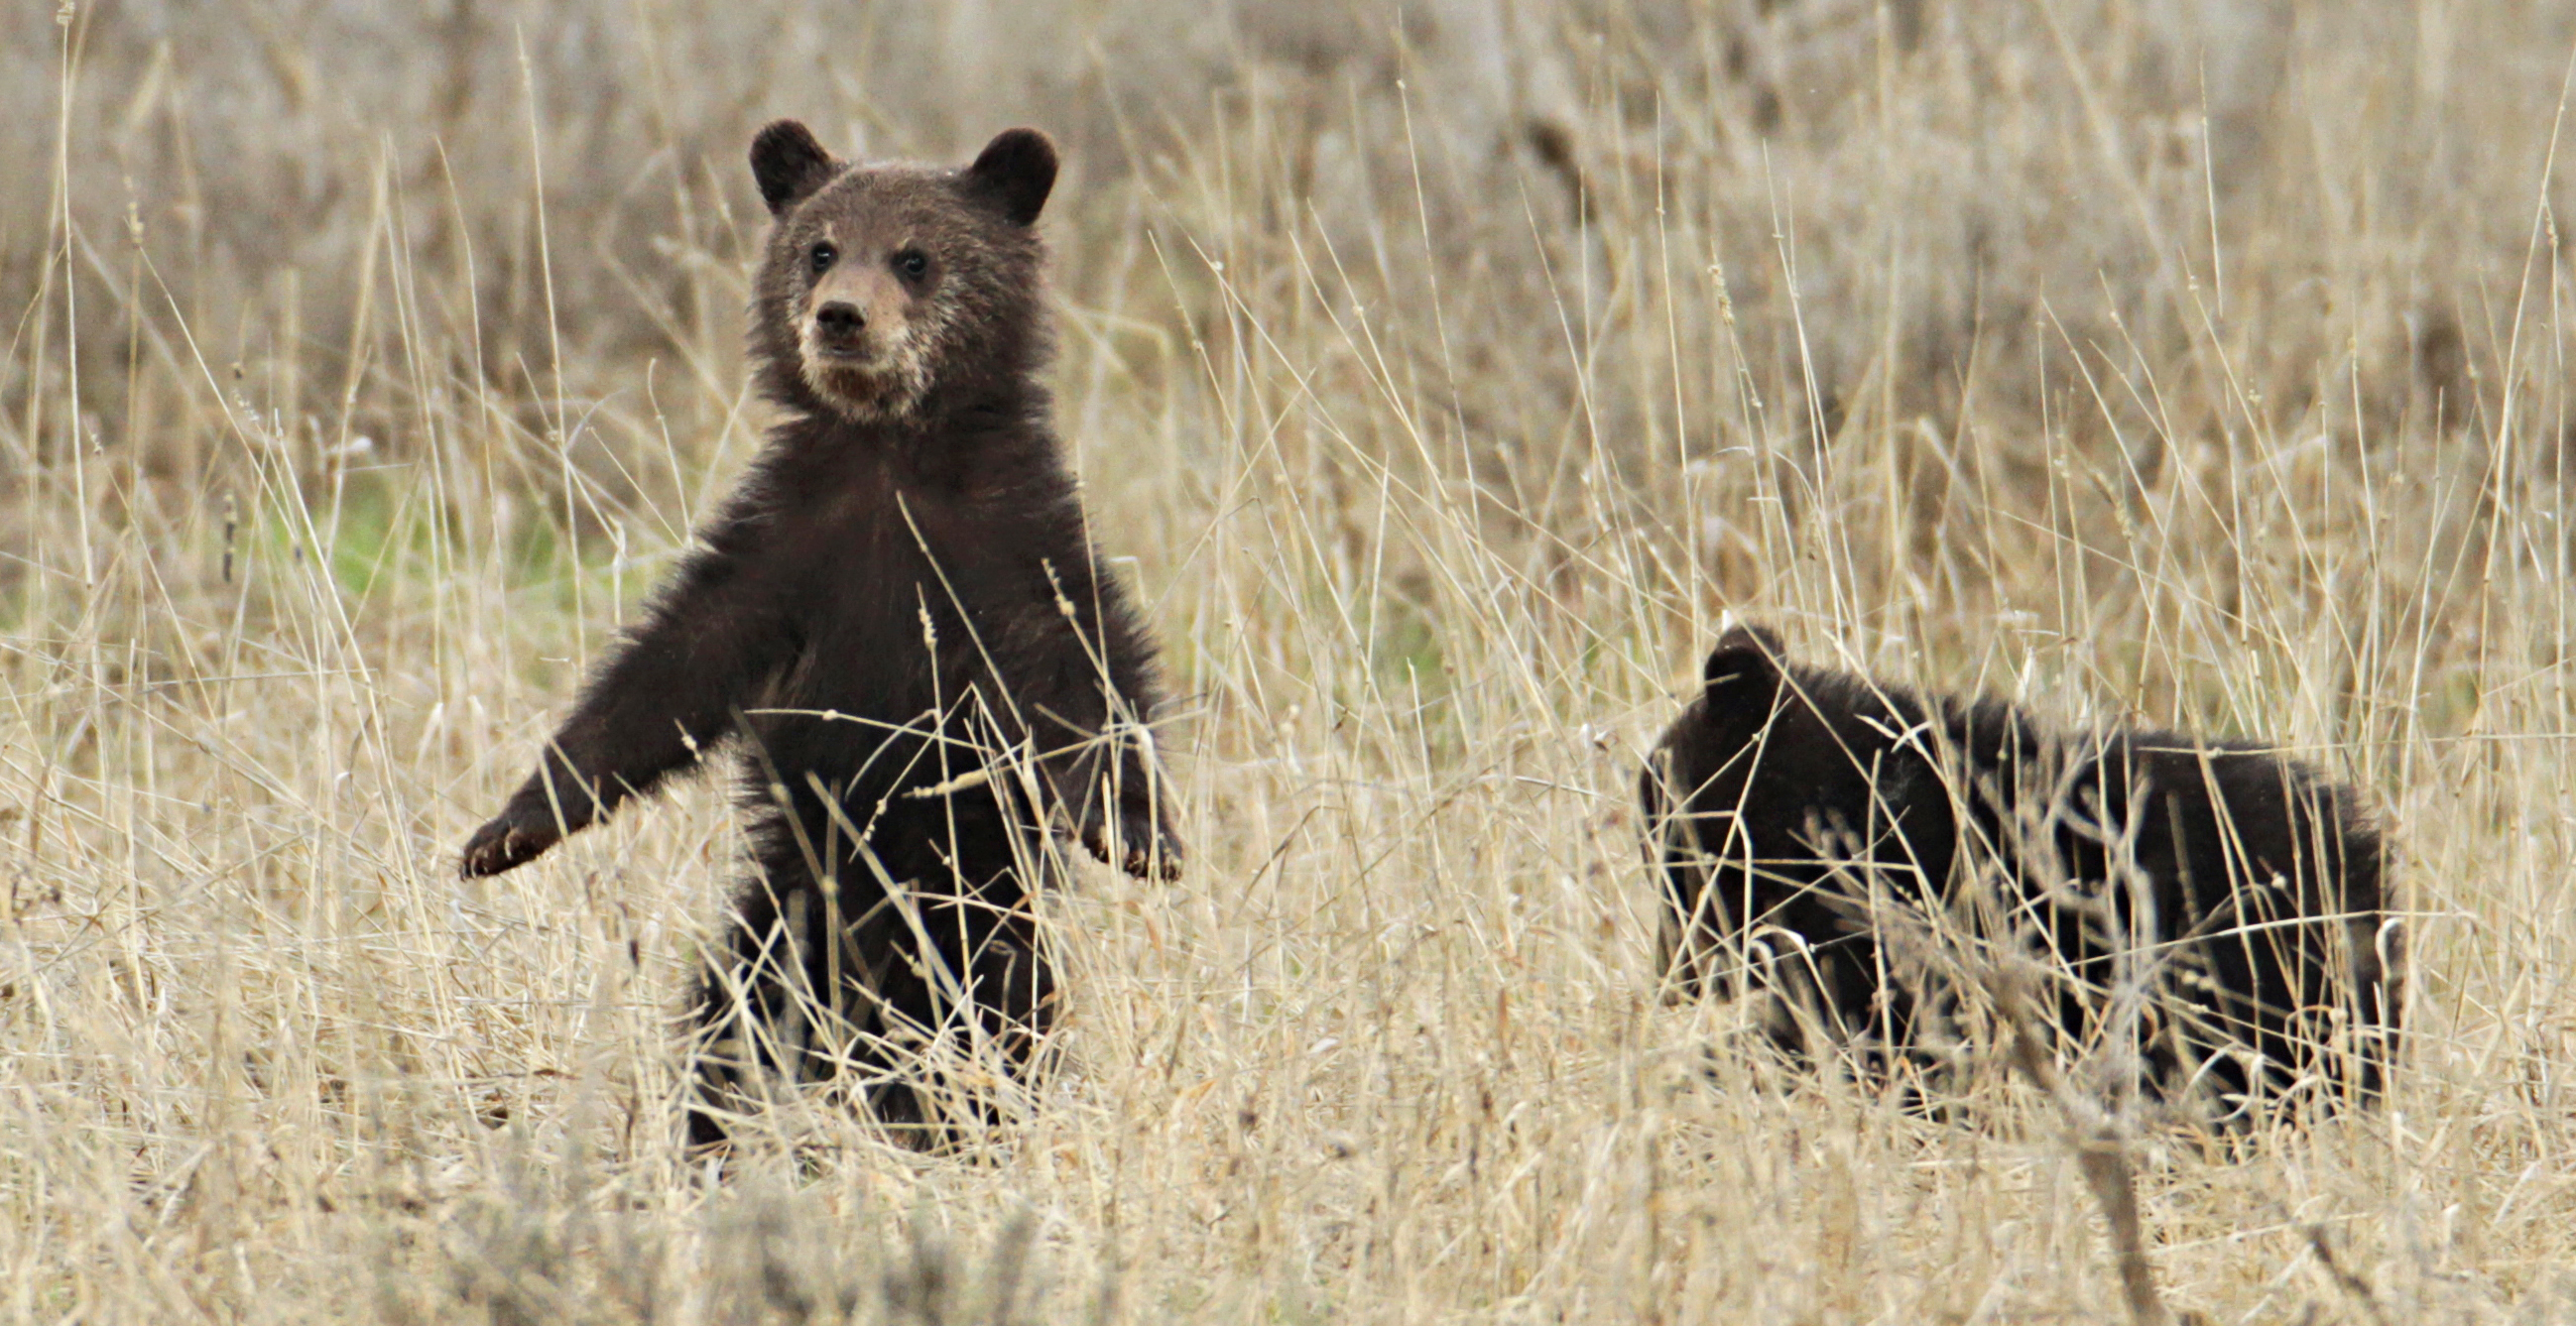 Two grizzly bear cubs in a grass field